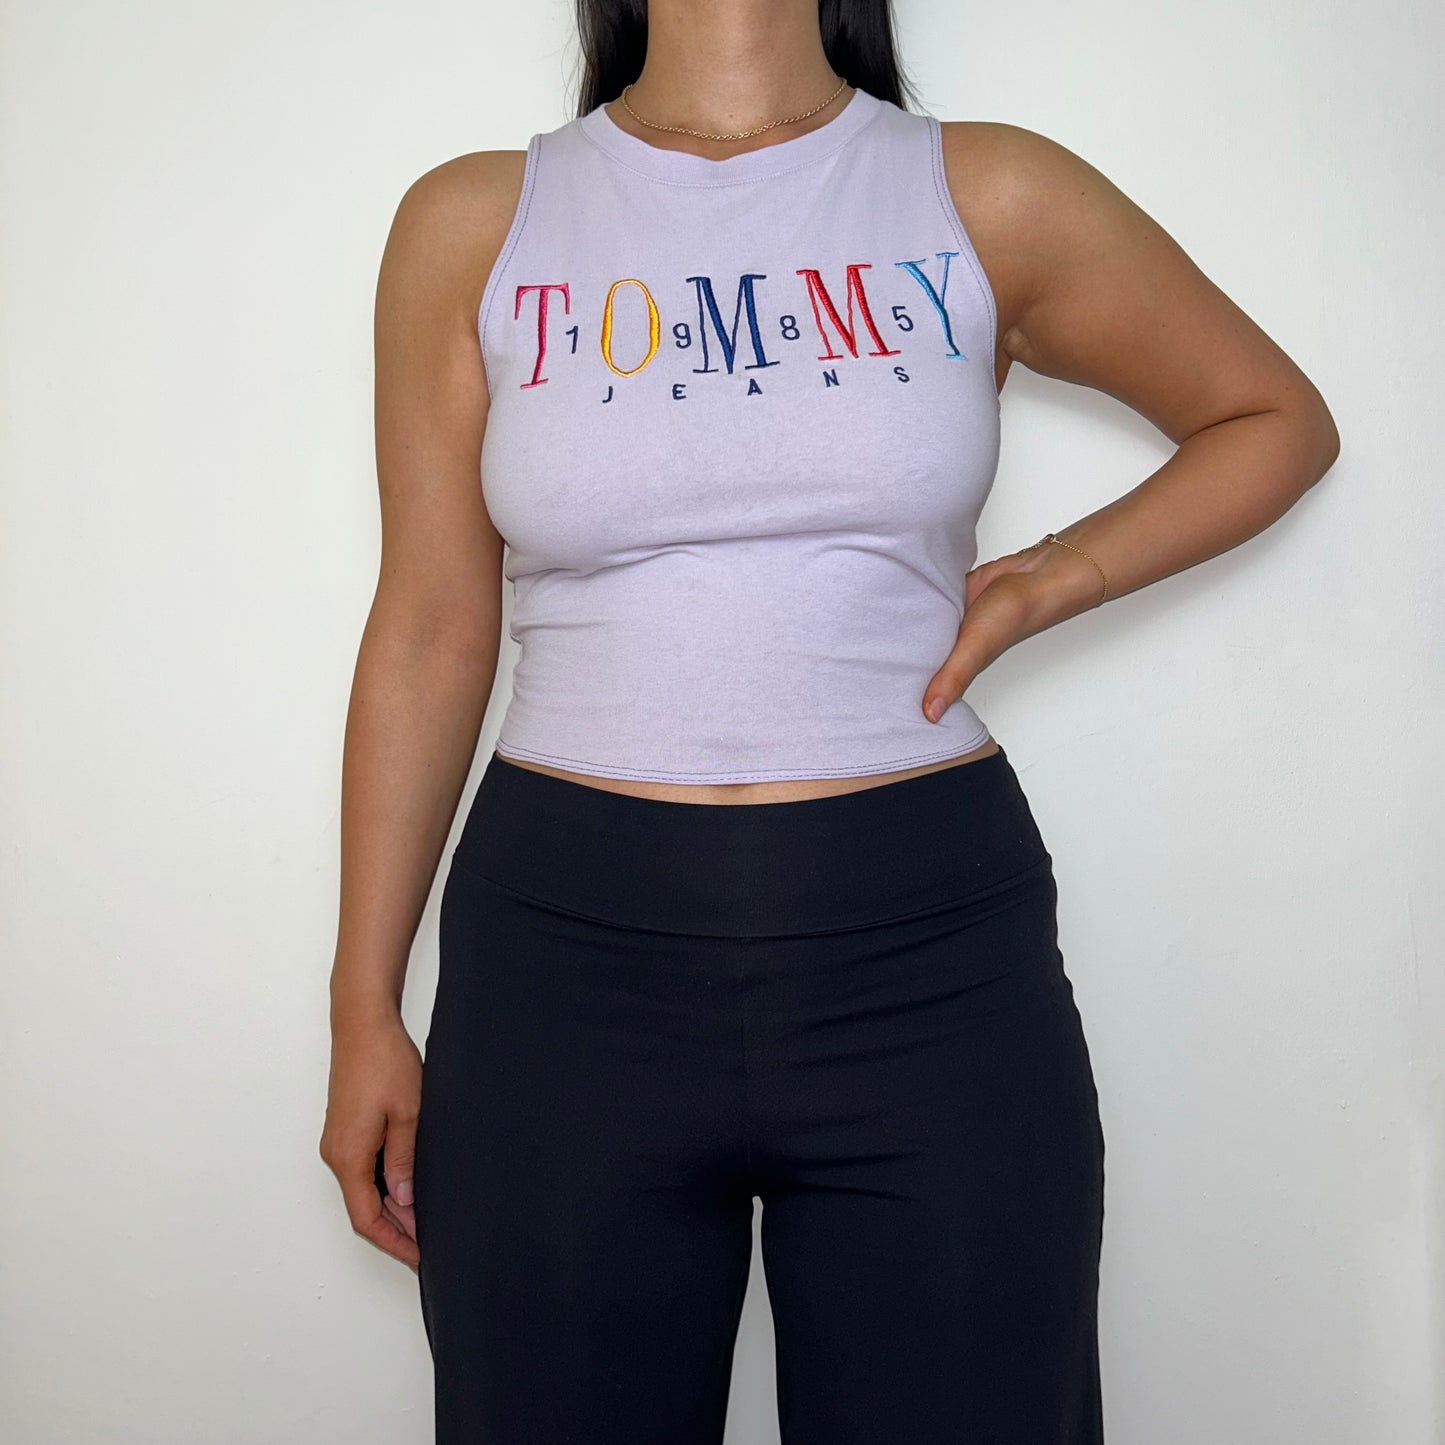 lilac short sleeve crop top with tommy jeans logo shown on a model wearing black trousers